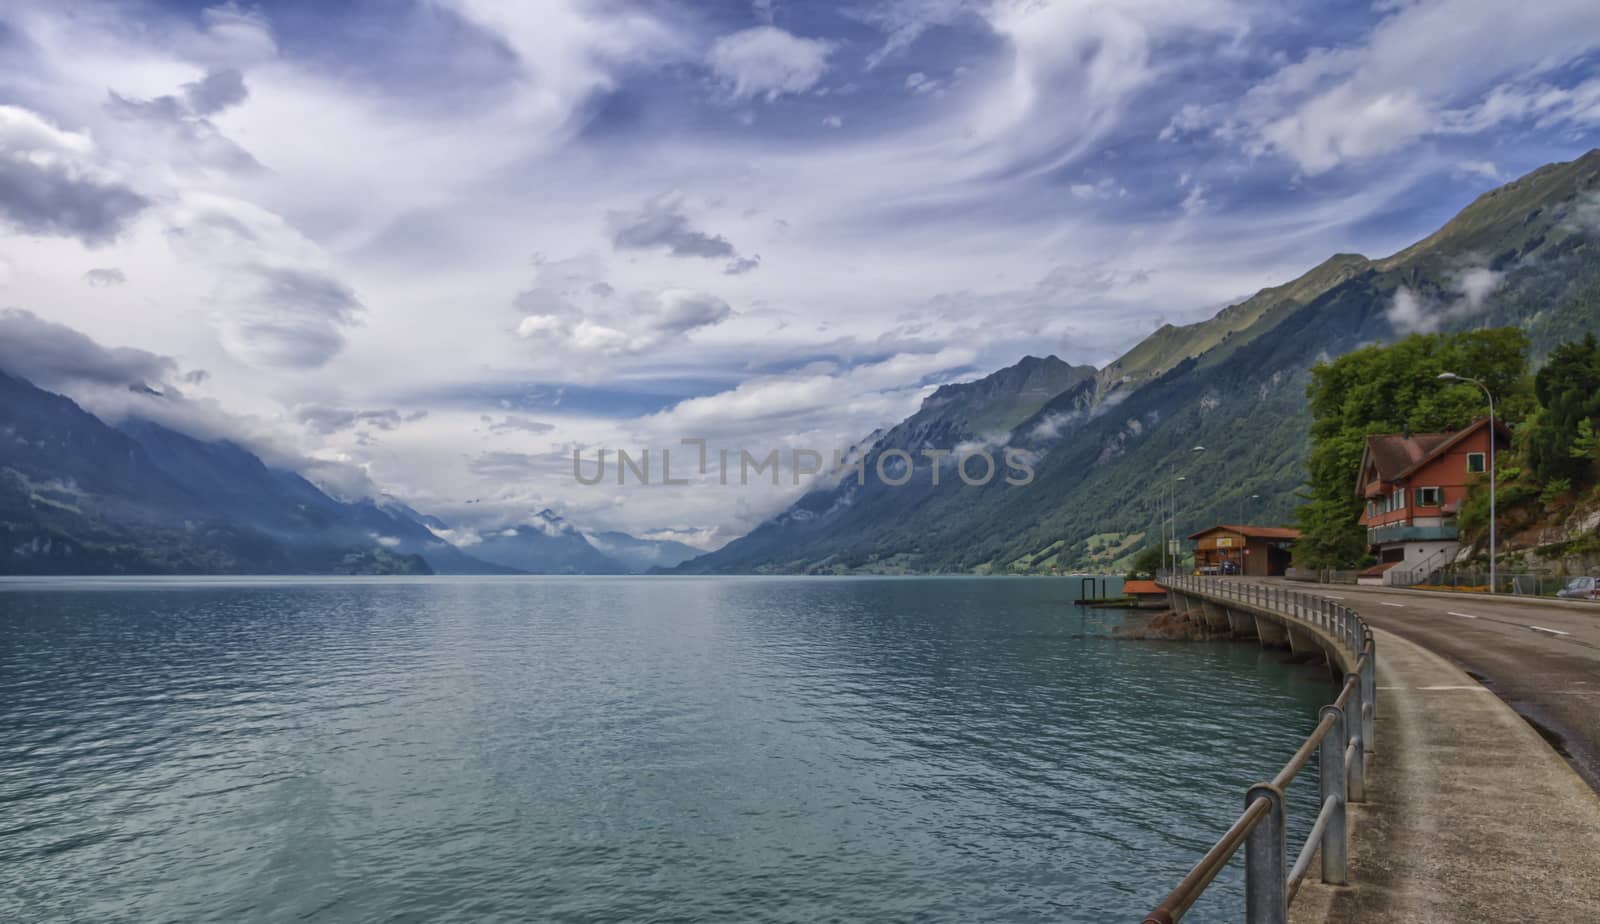 Lake and Alps mountains at Brienz in Switzerland by Elenaphotos21